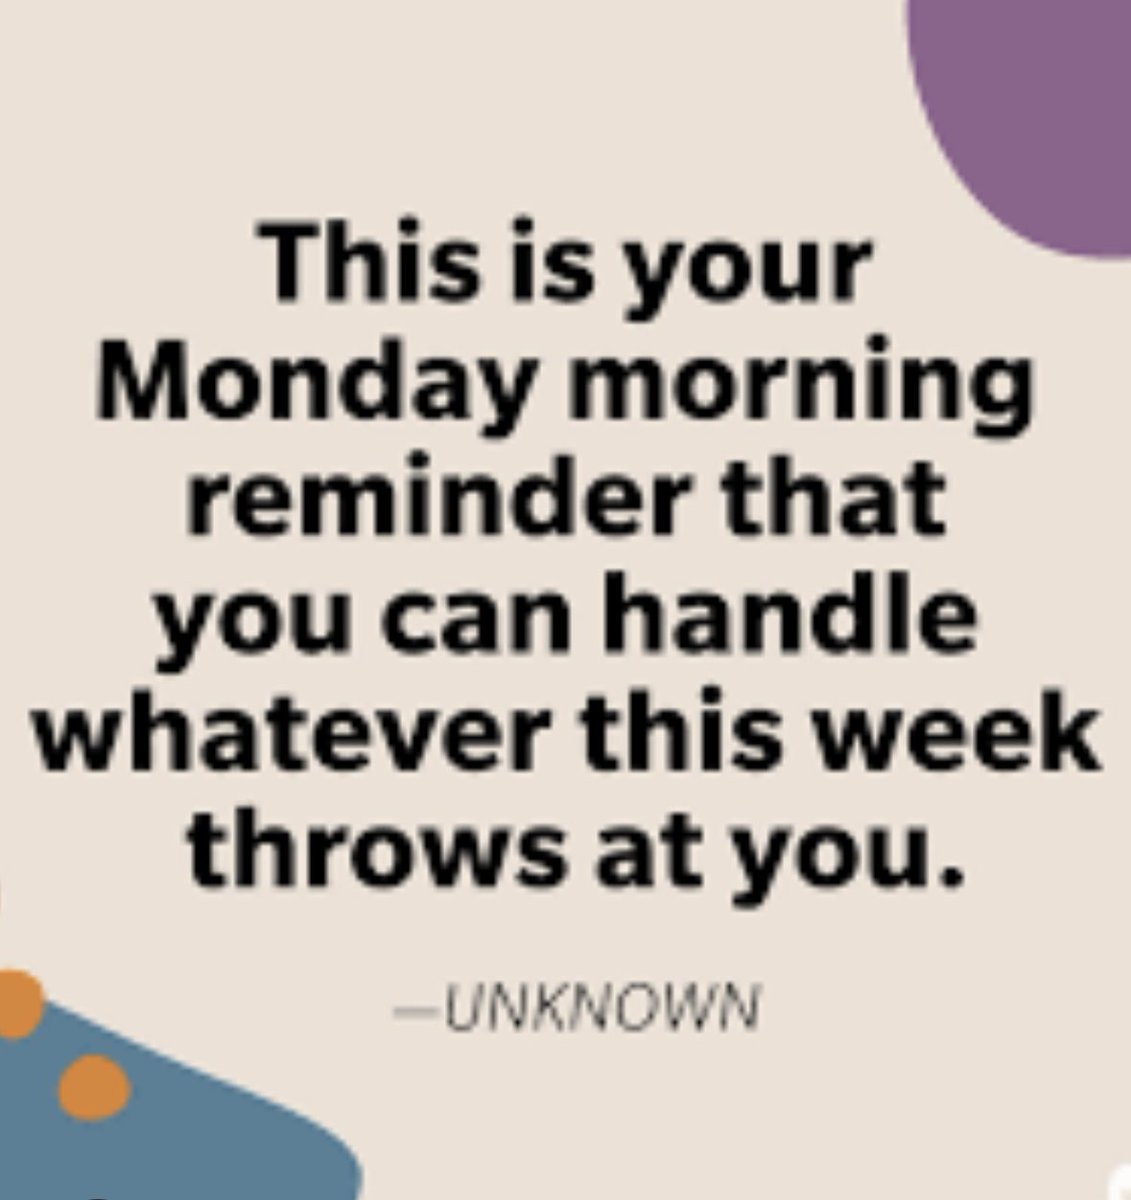 'Exciting start to the week with plenty of job vacancies, training opportunities, and positive prospects lining up! Looking forward to seizing the possibilities this week has in store. #MondayMotivation #OpportunitiesAhead'